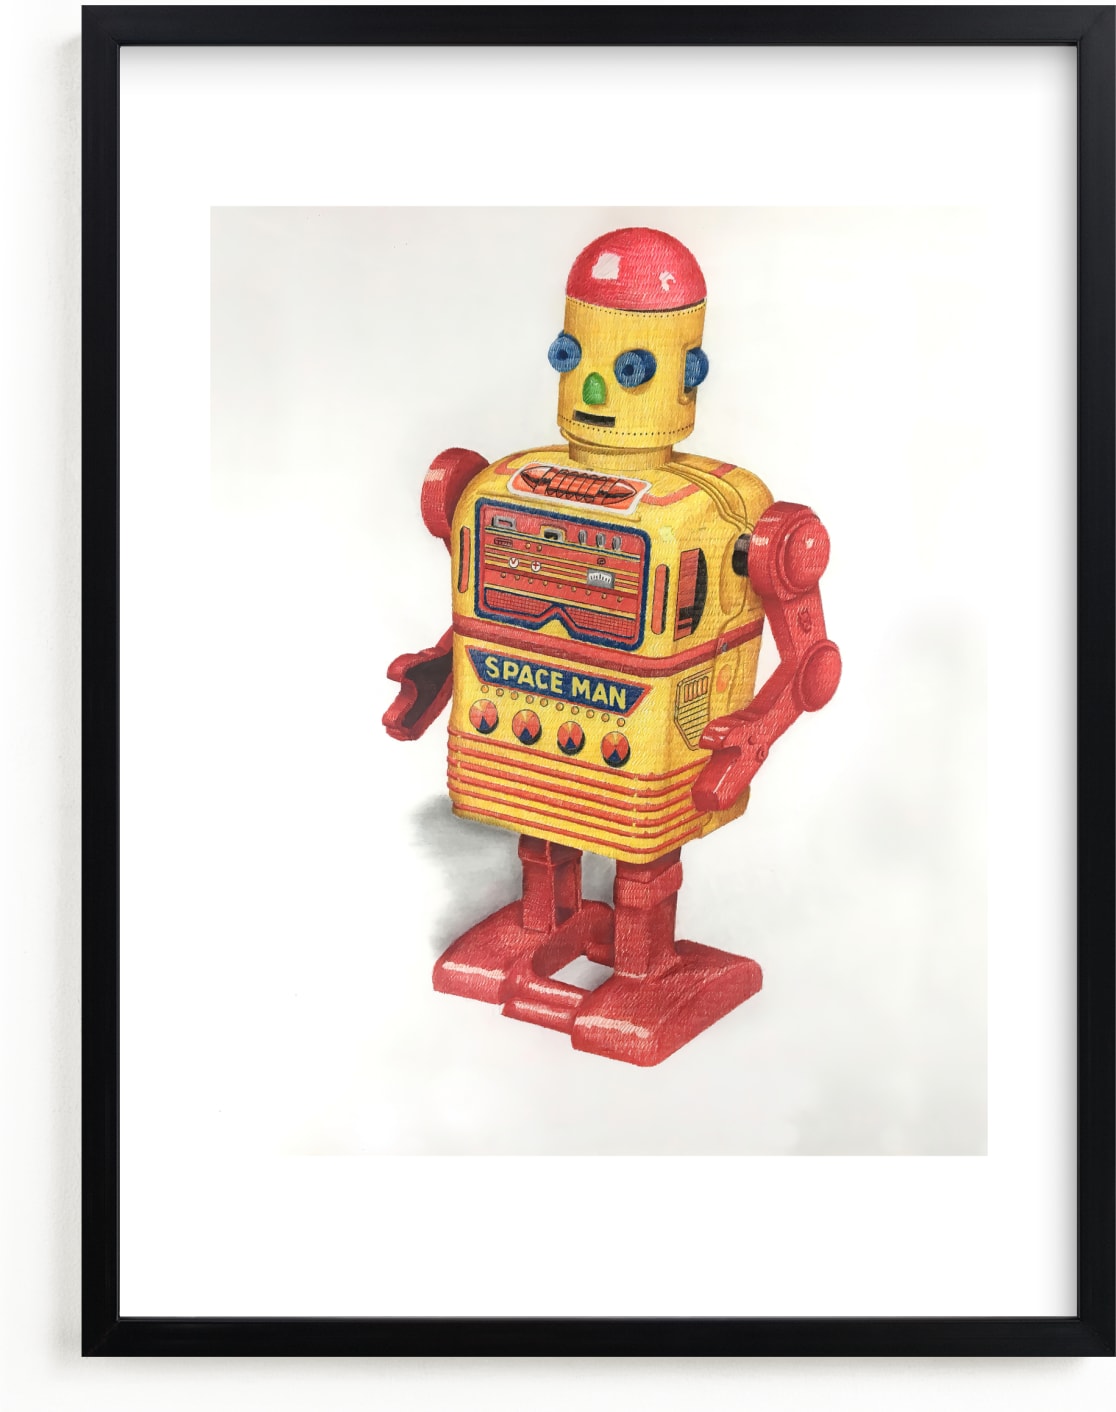 This is a yellow kids wall art by Ed Hogan called Space Man Robot.